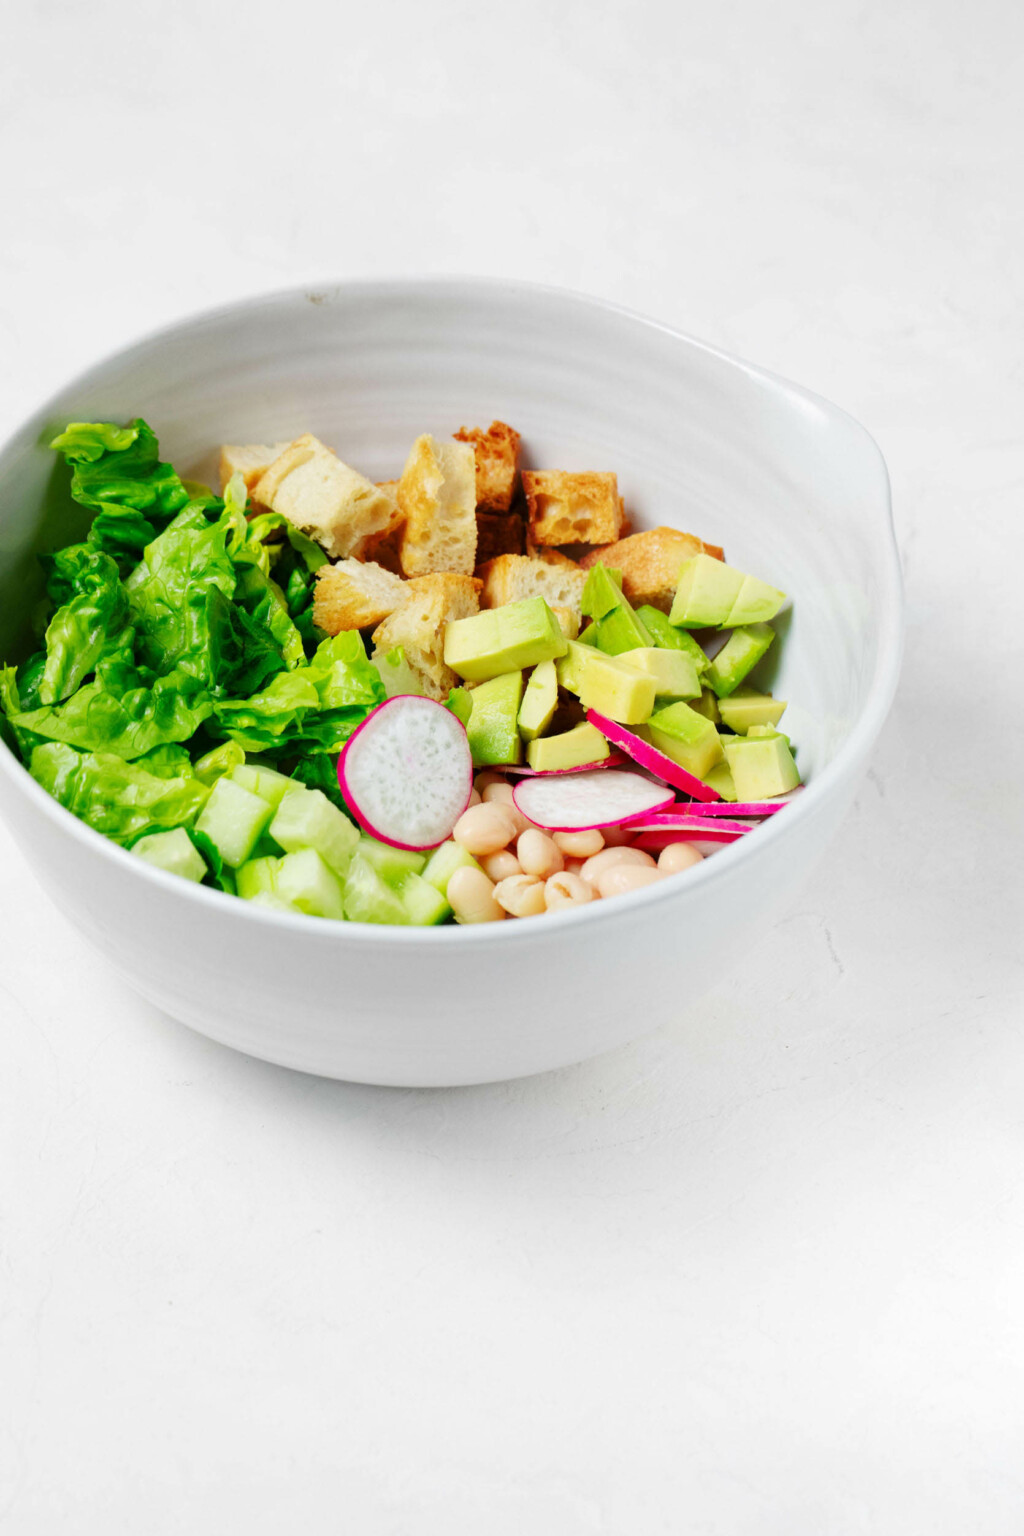 A large, white serving bowl is filled with cubed bread, radishes, white beans, and greens.